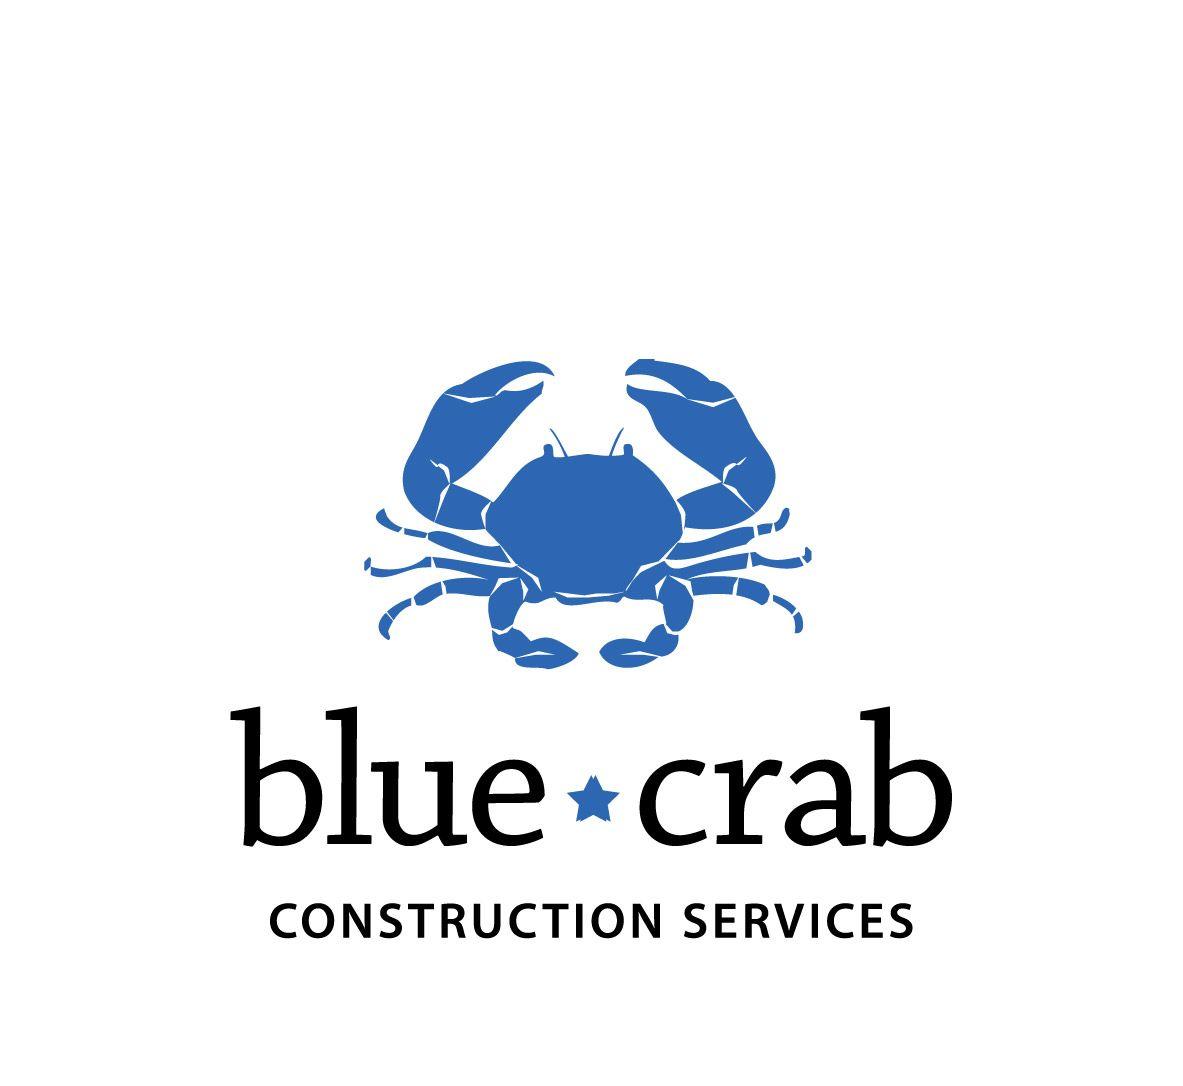 Blue Crab Logo - Serious, Traditional, Construction Logo Design for see the attached